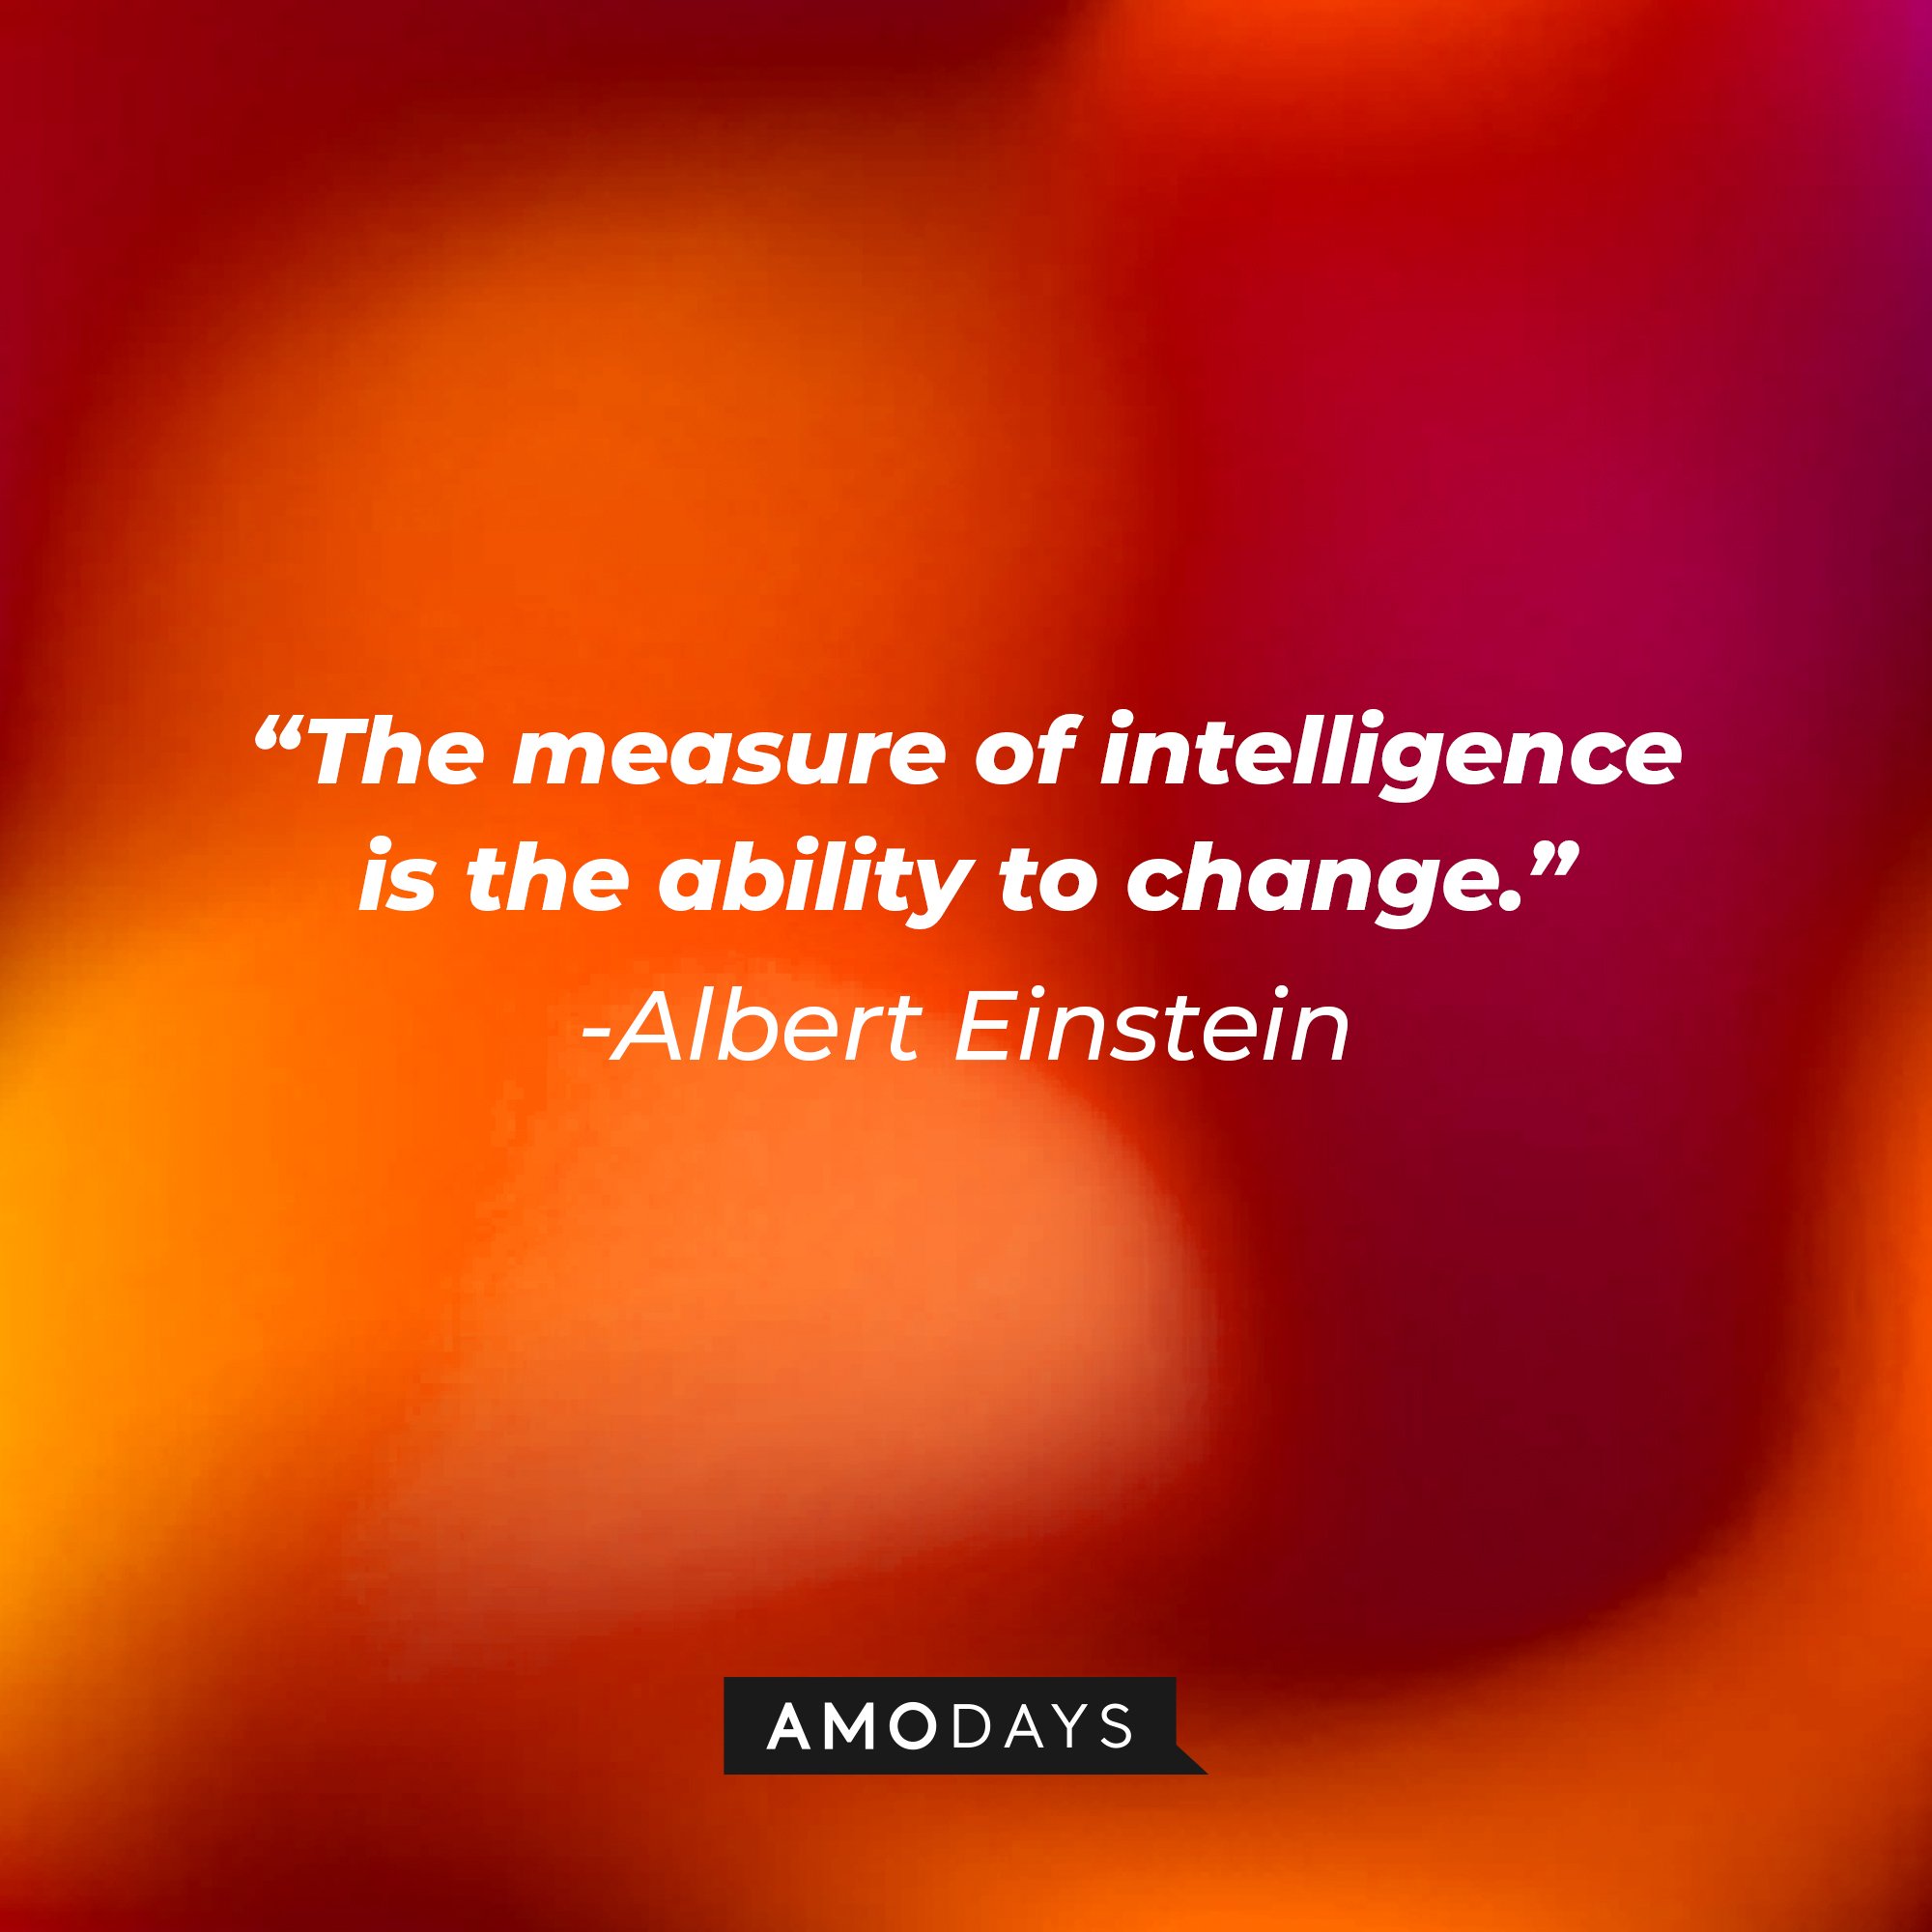 Albert Einstein’s quote: “The measure of intelligence is the ability to change." | Image: AmoDays